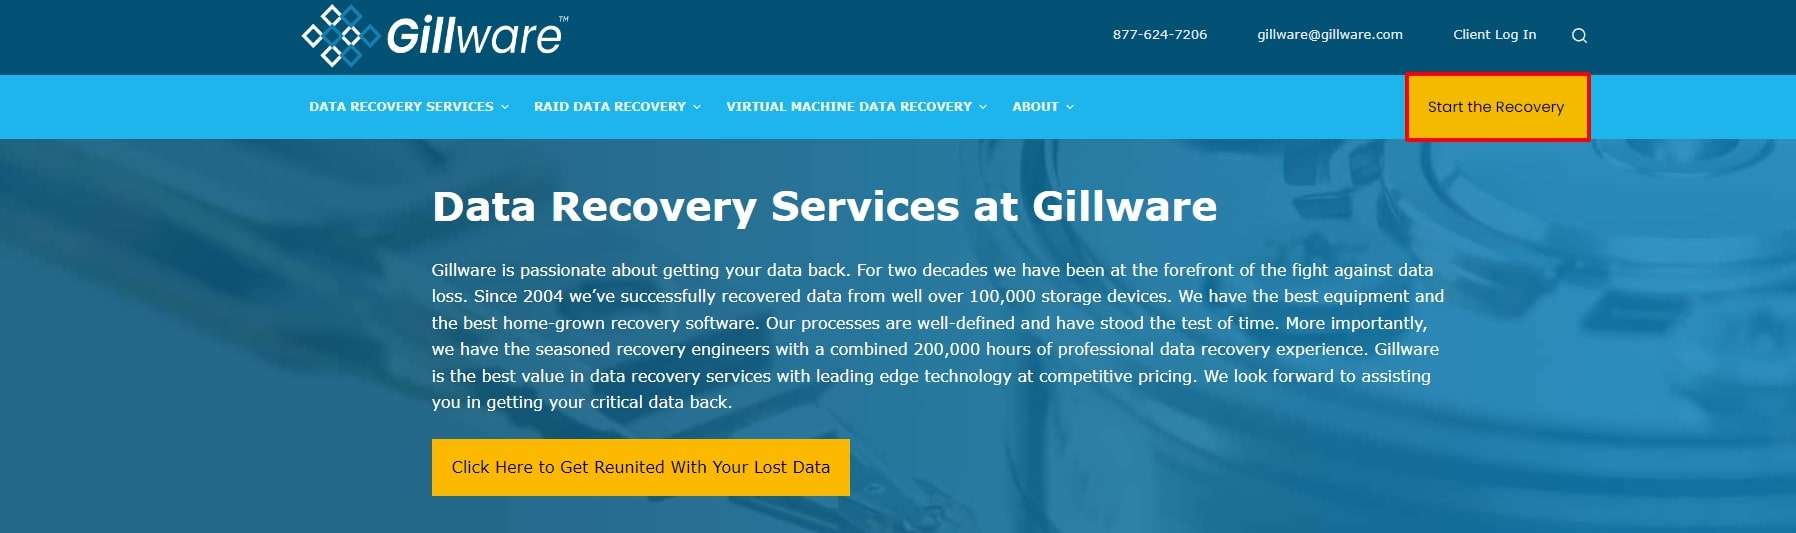 gillware data recovery application 